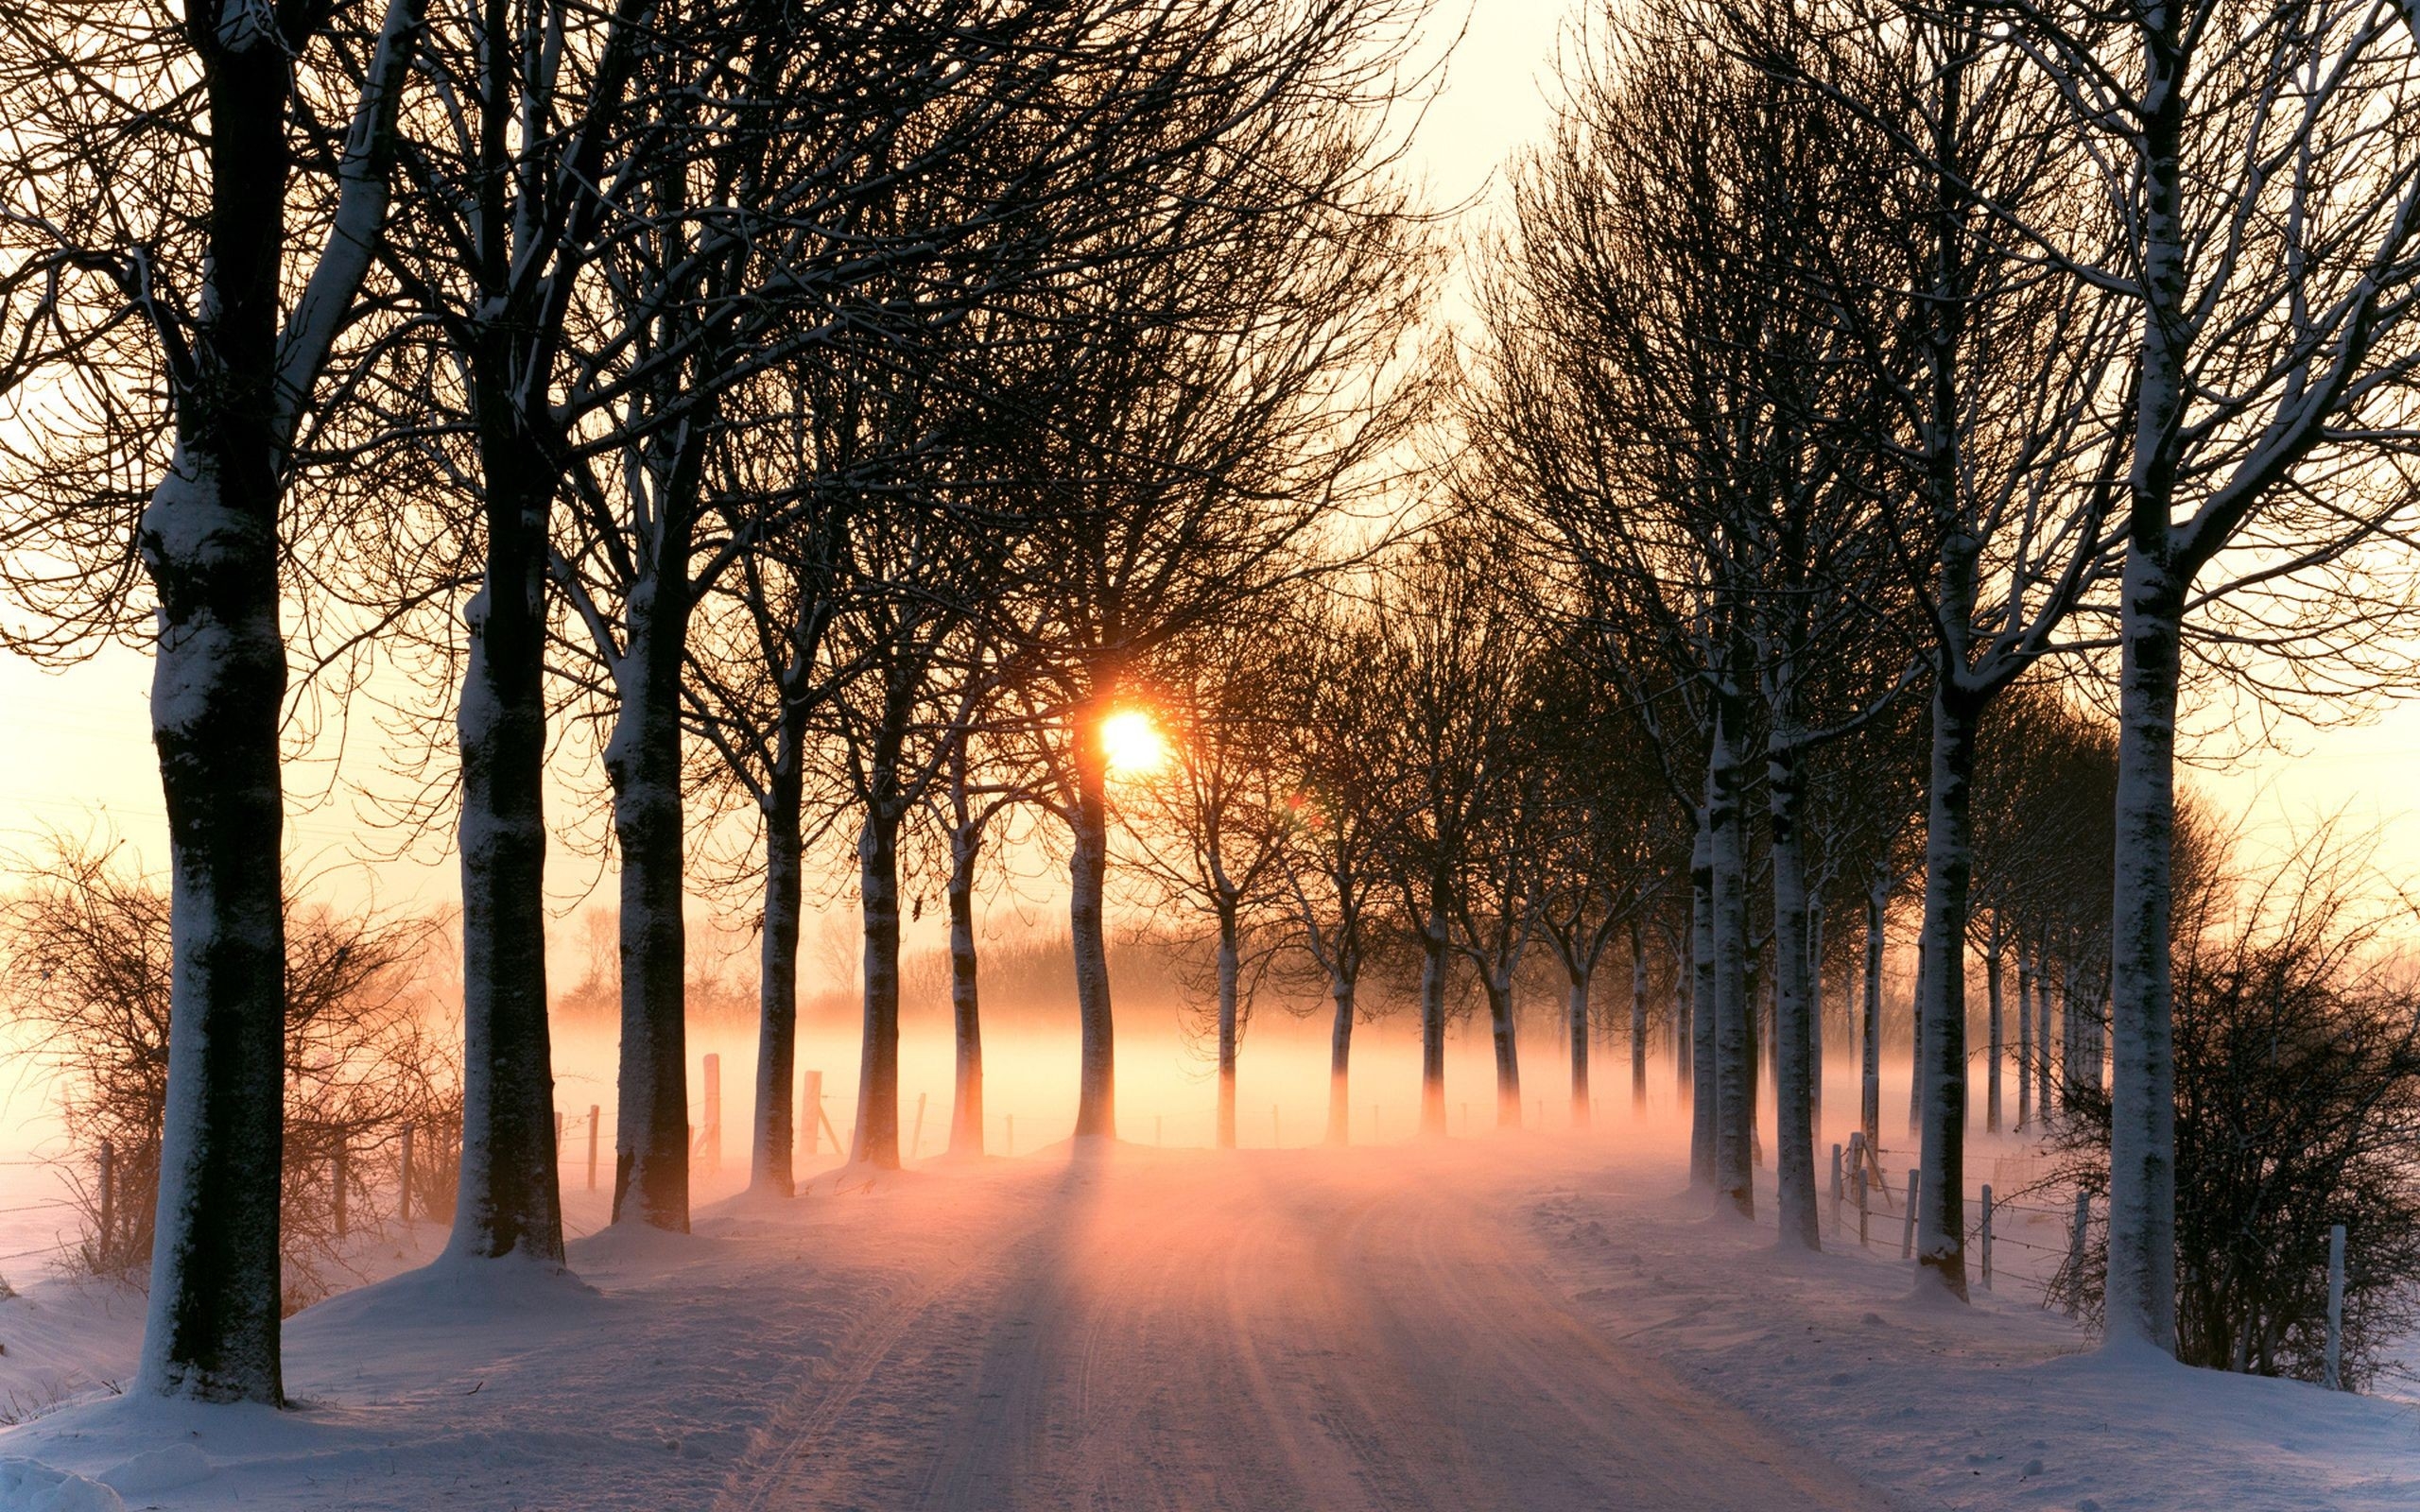 Trees along a snowy road at sunset